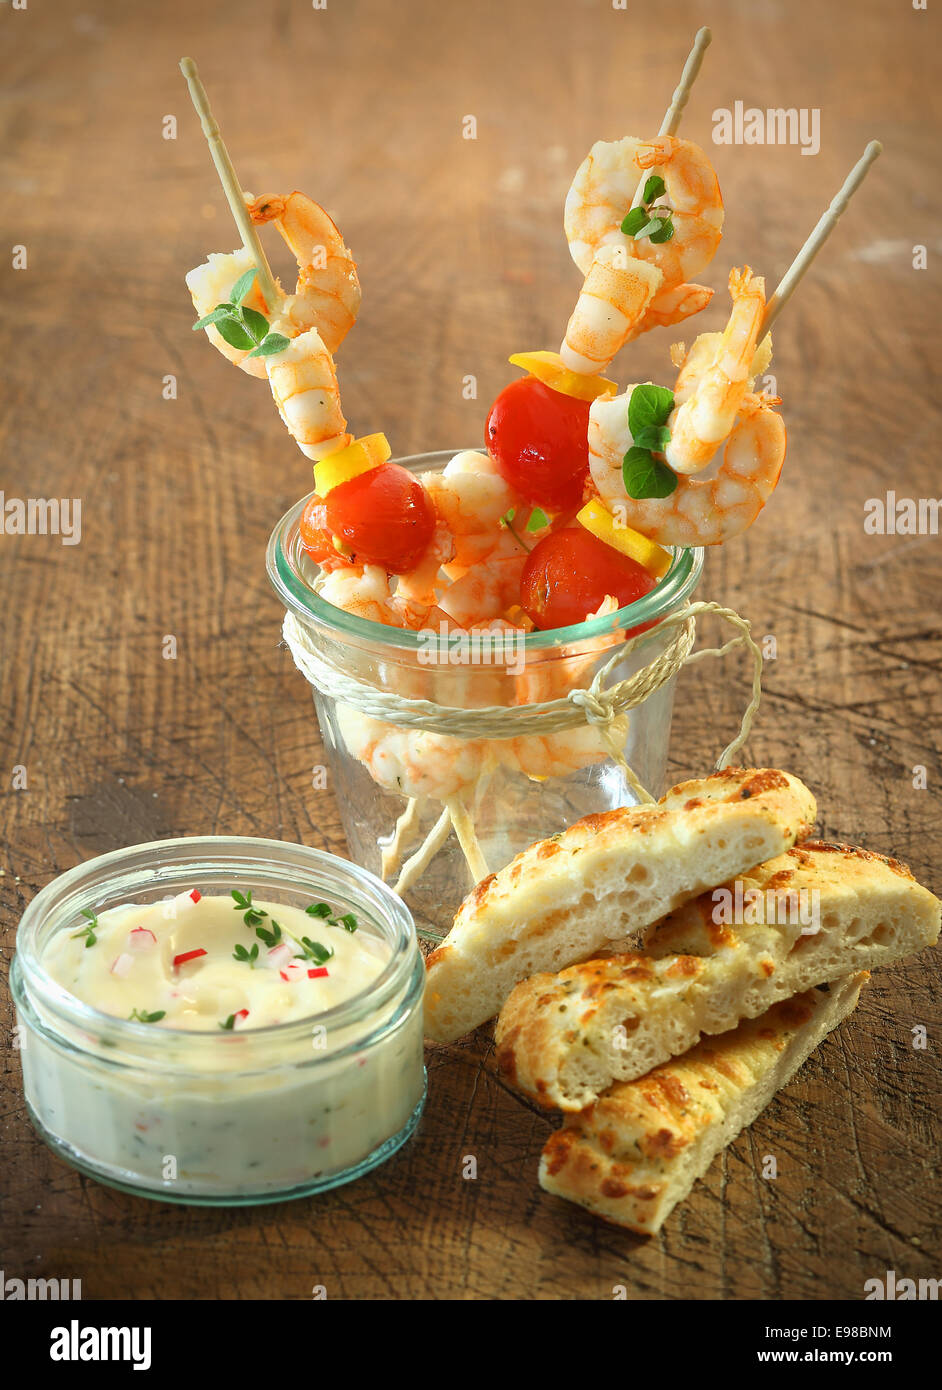 Tasty appetizers of seafood cocktail sticks with shrimps, cheese and tomato standing in a jar alongside fresh focaccia bread and a tub of tartare sauce Stock Photo